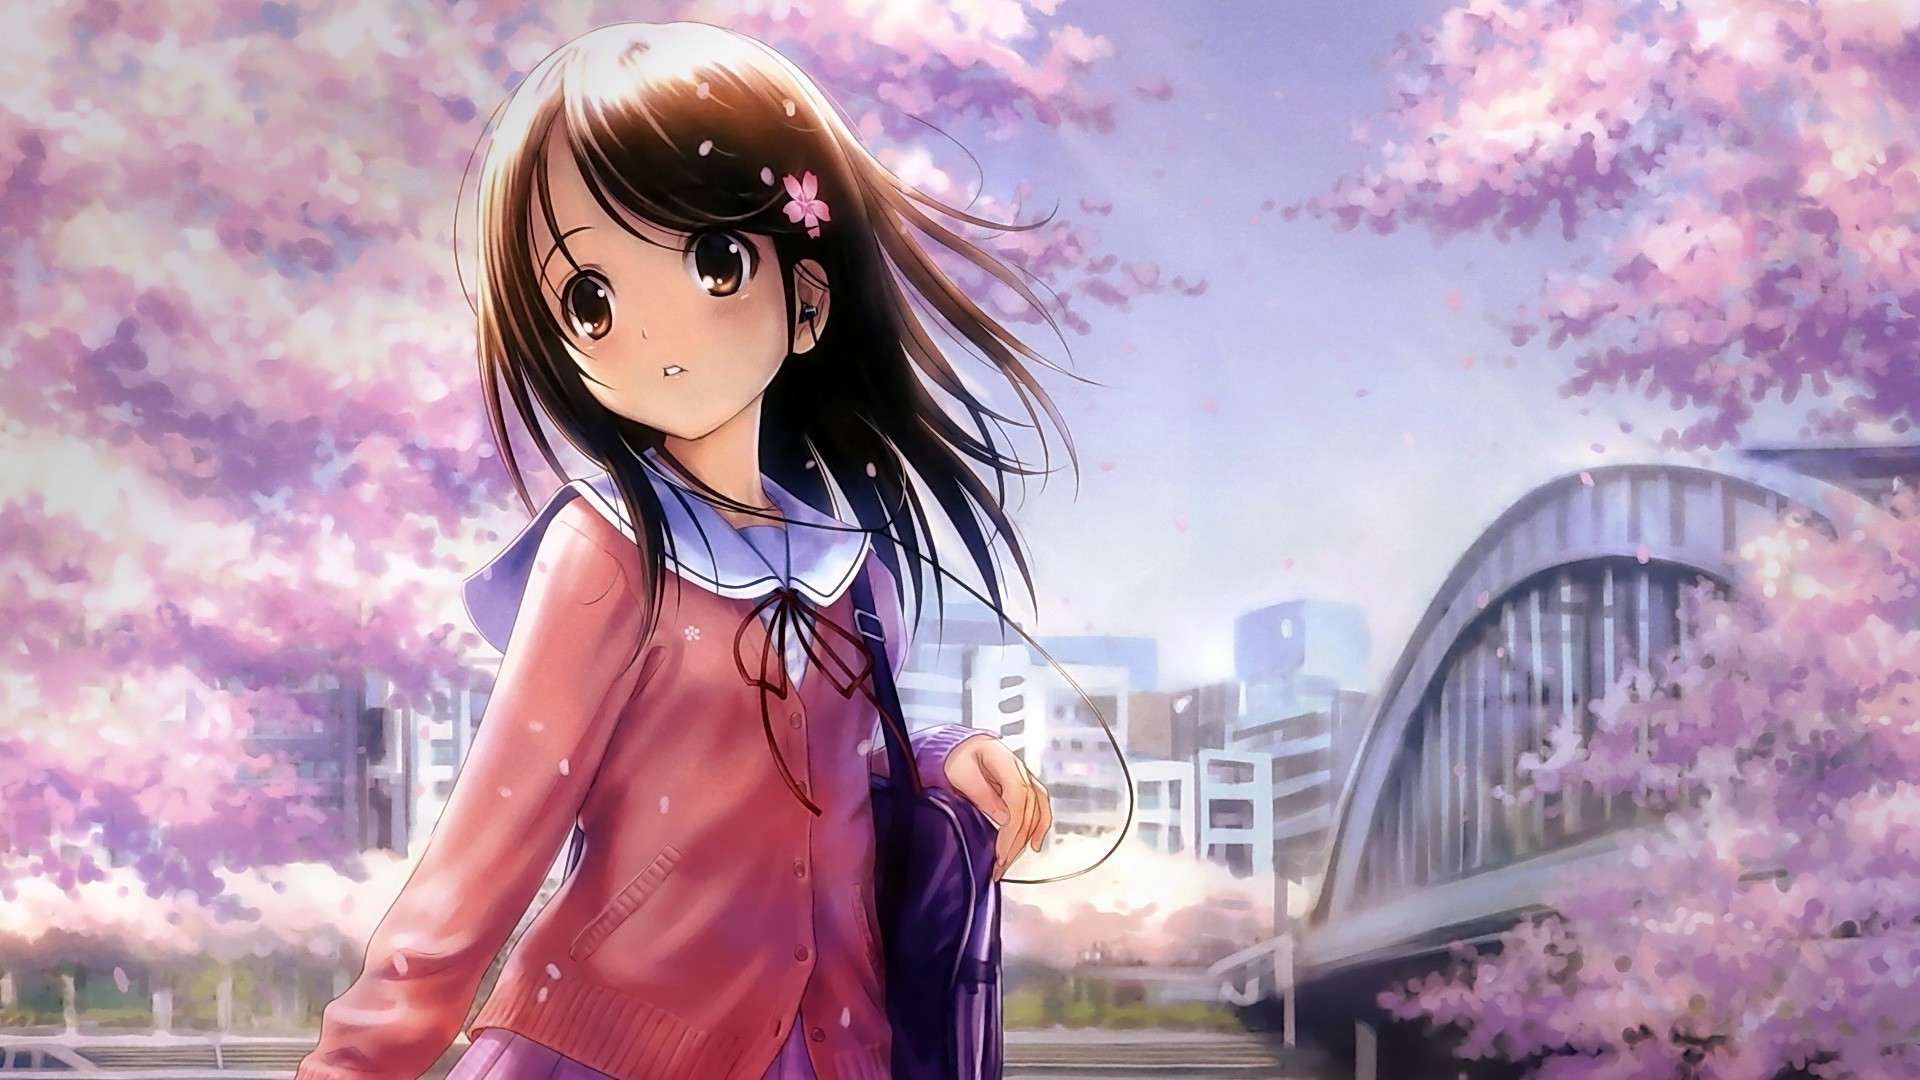 1920x1080 ... Cute Anime Wallpapers 82 background pictures